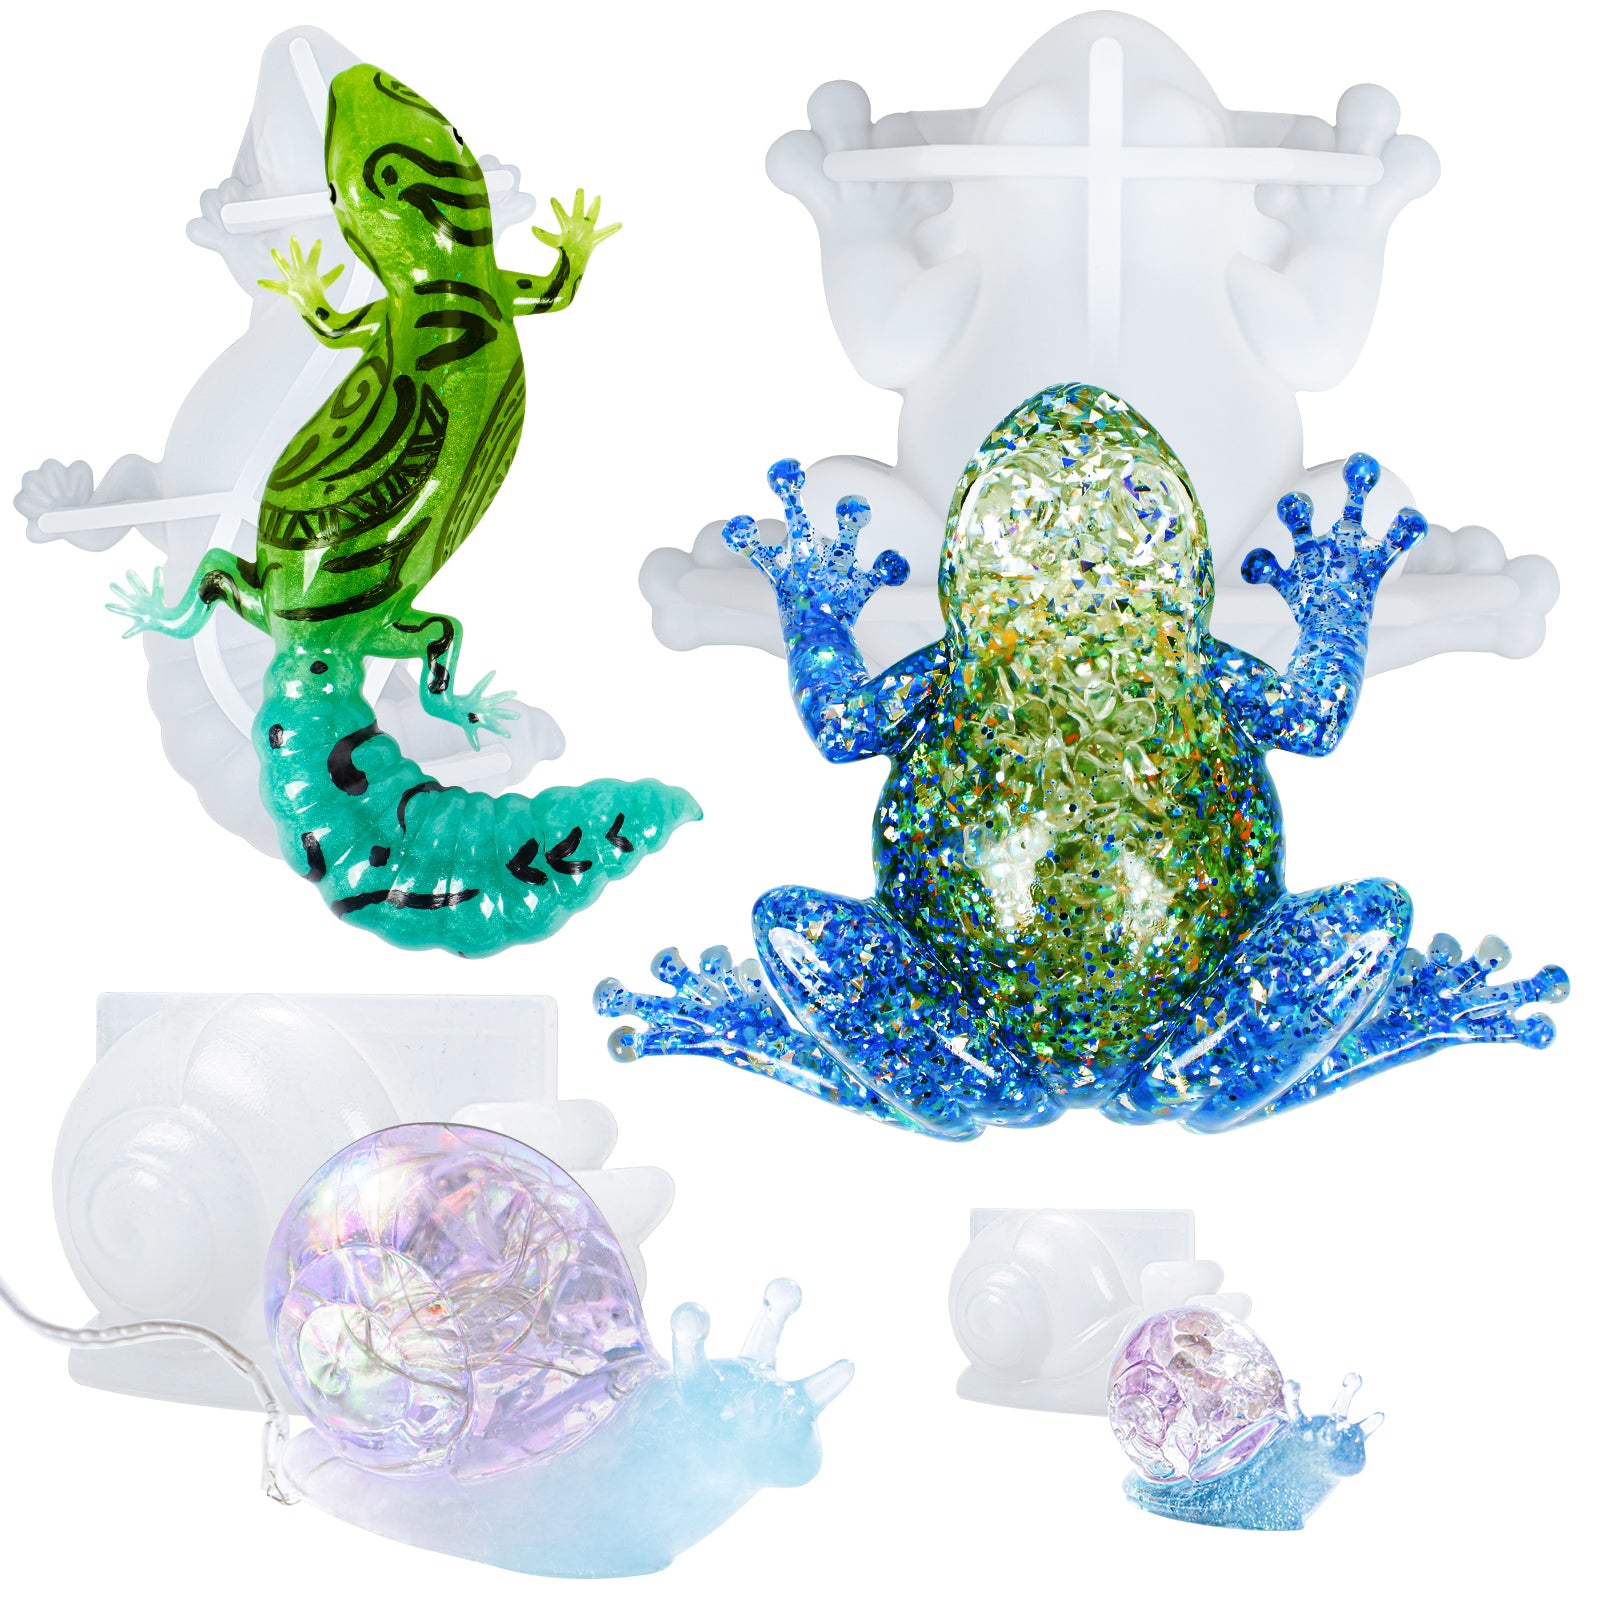 Funshowcase 3D Frog Lizard Snail Silicone Molds Pack of 4